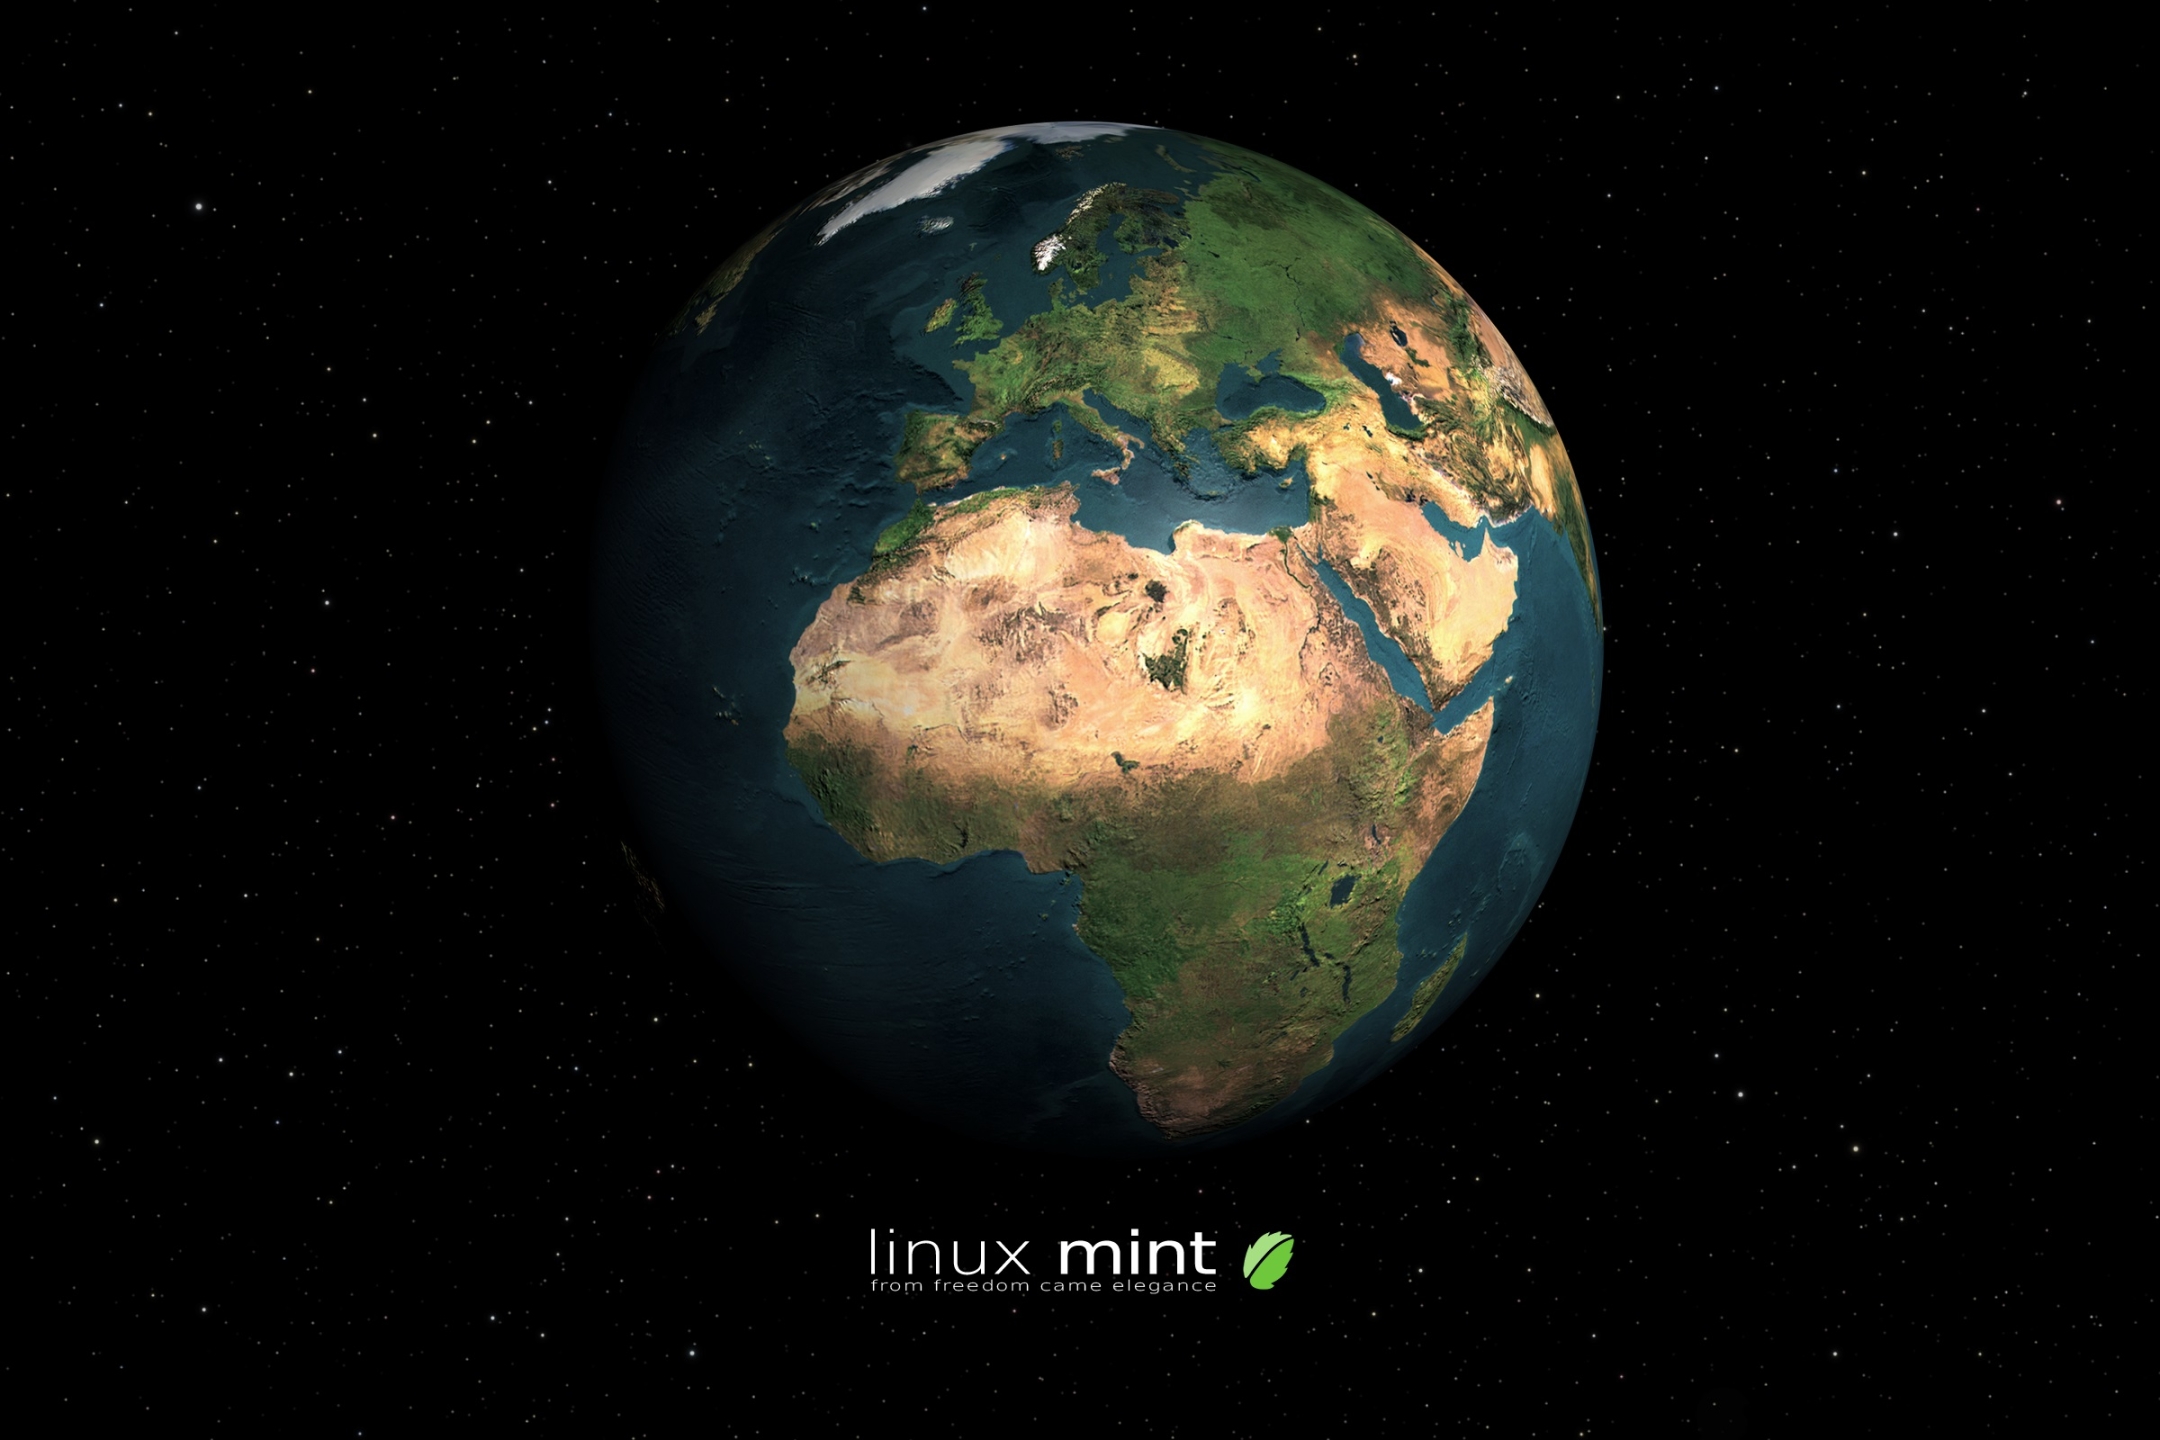 operating system, technology, linux mint, linux, earth, planet